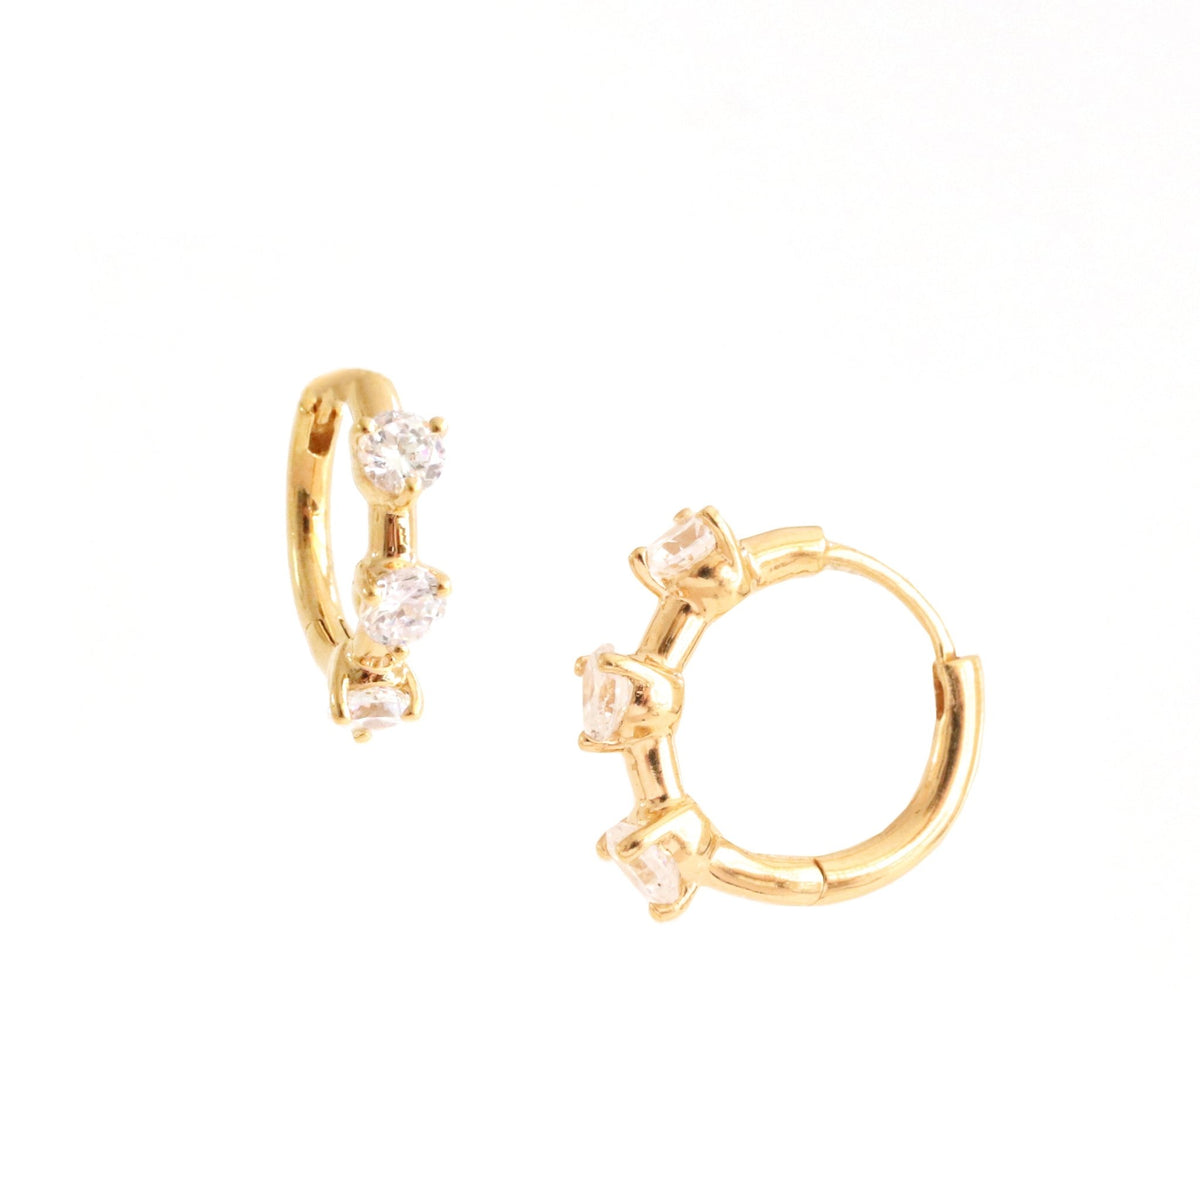 SCATTERED LOVE HUGGIE HOOPS - CUBIC ZIRCONIA &amp; GOLD - SO PRETTY CARA COTTER